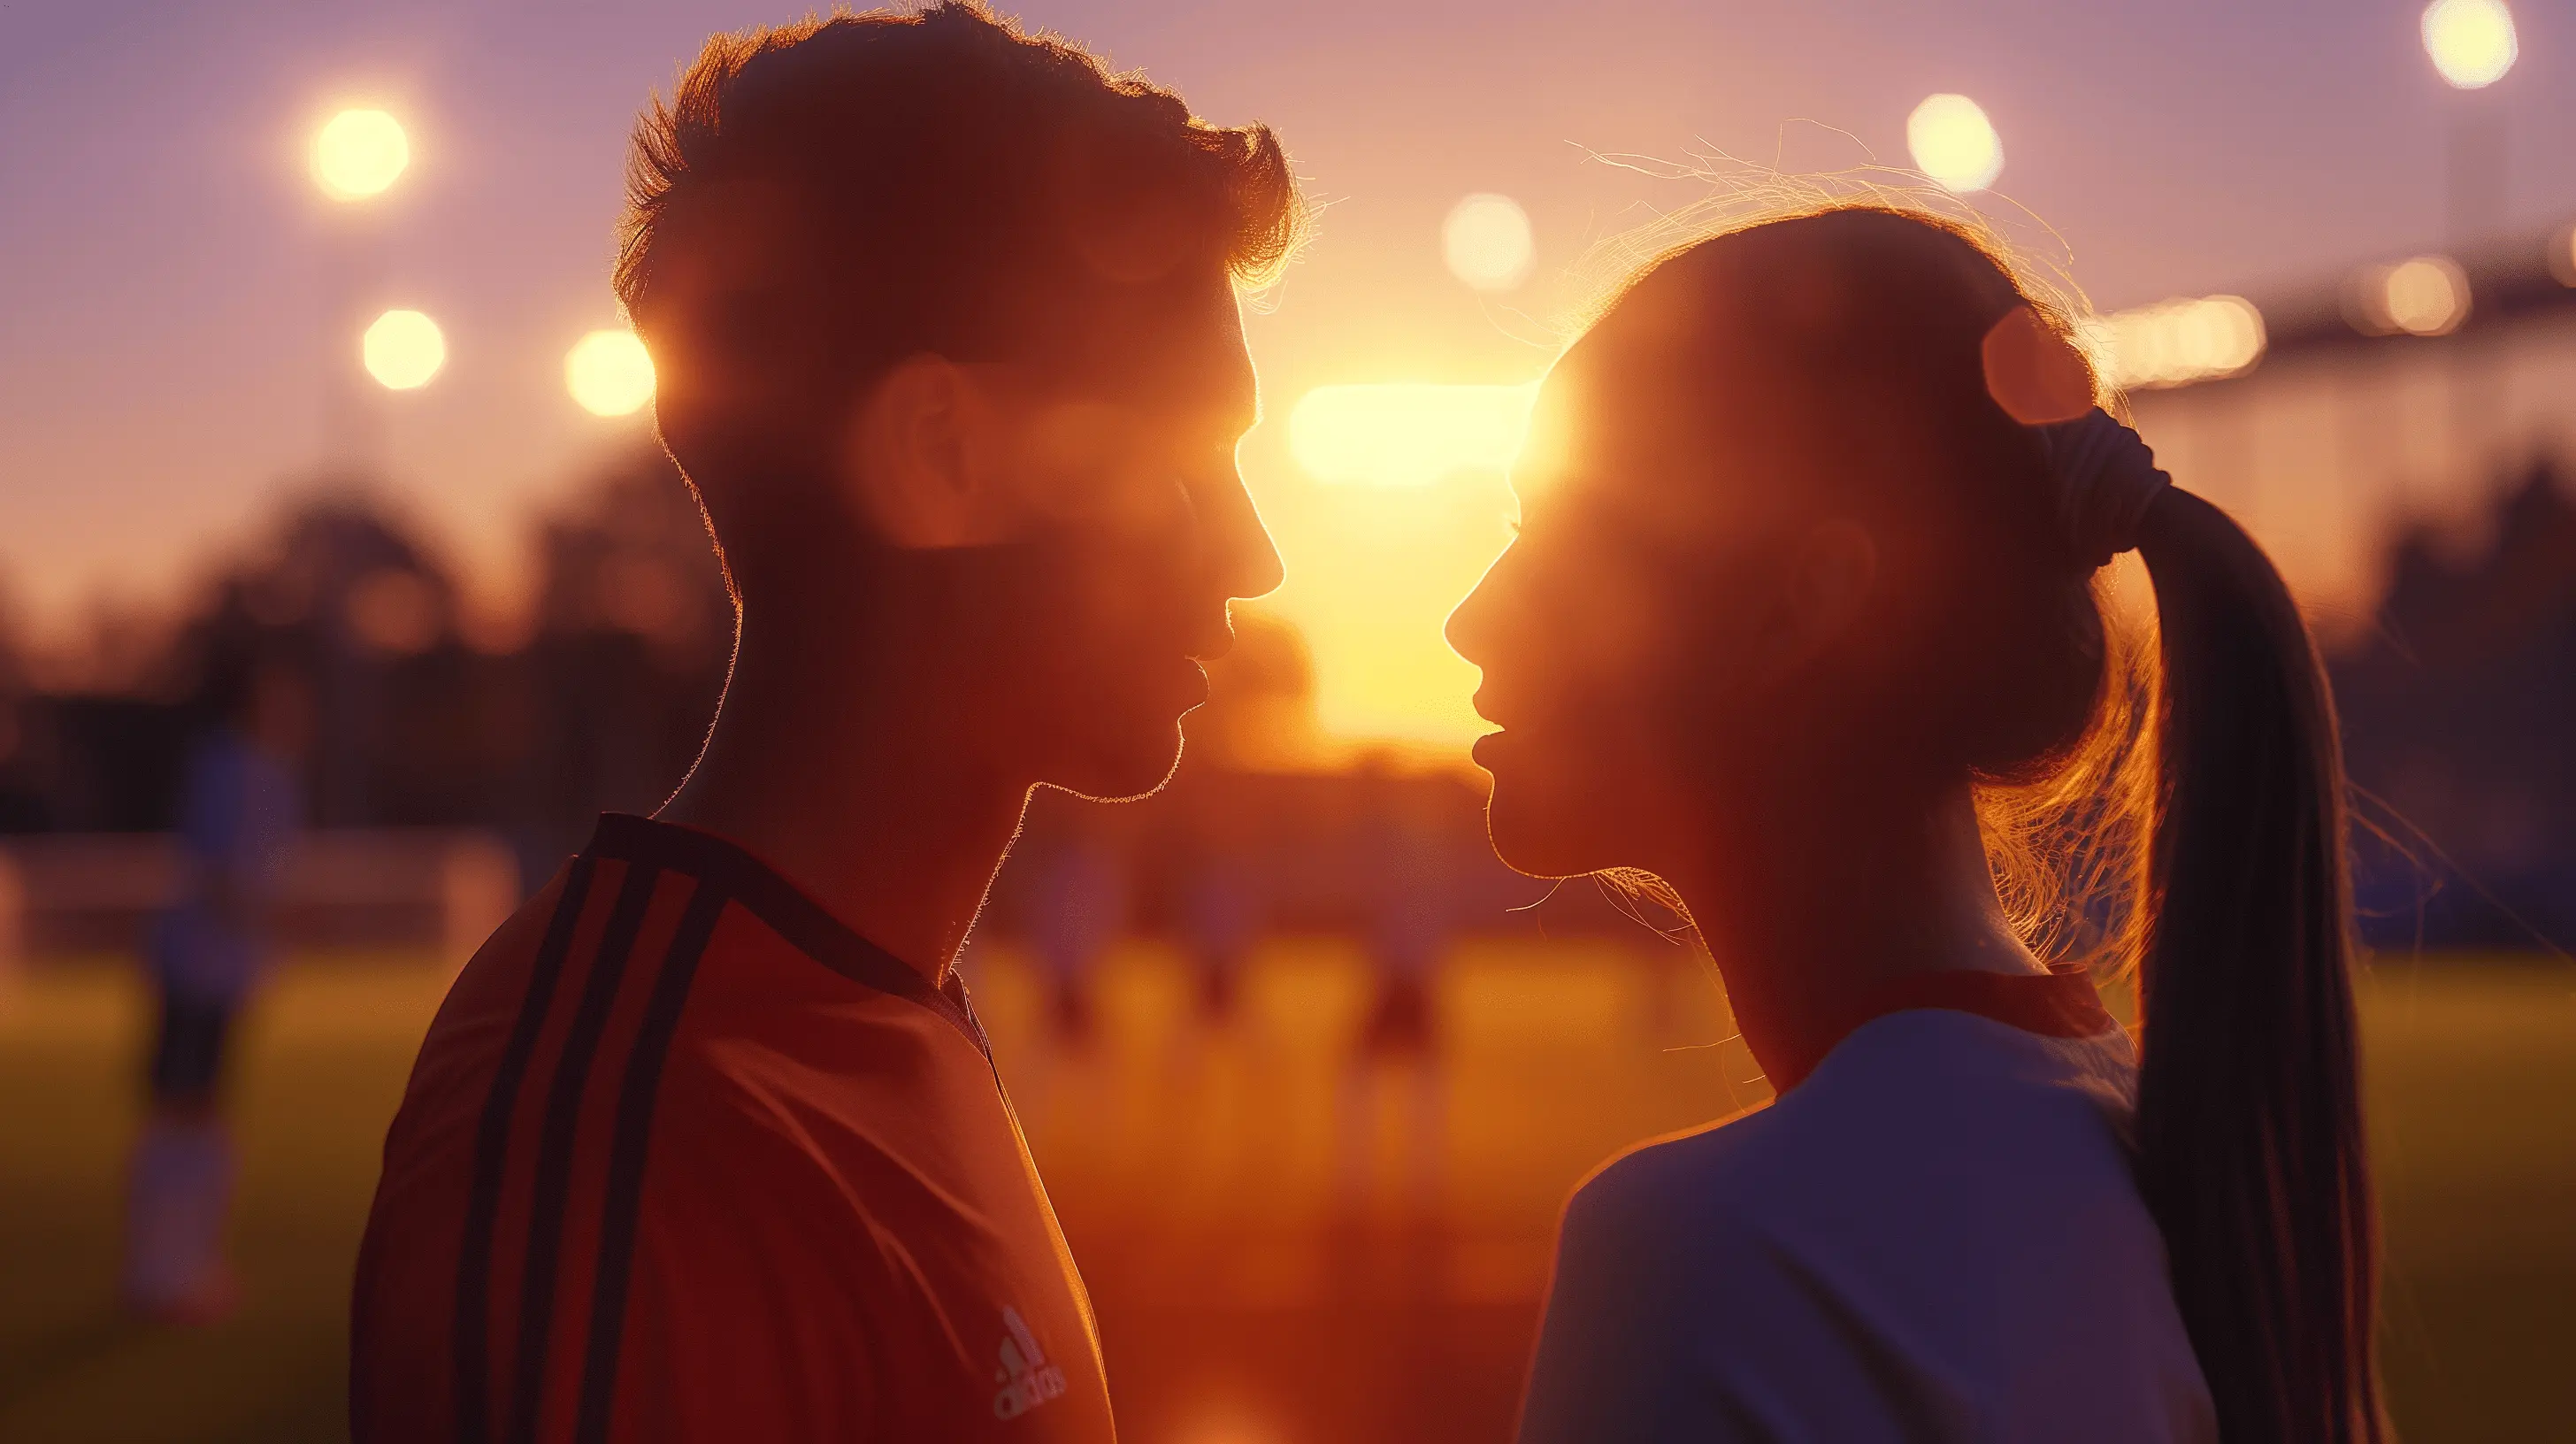 Sporty man and girl staring at each other at a game with lights behind them